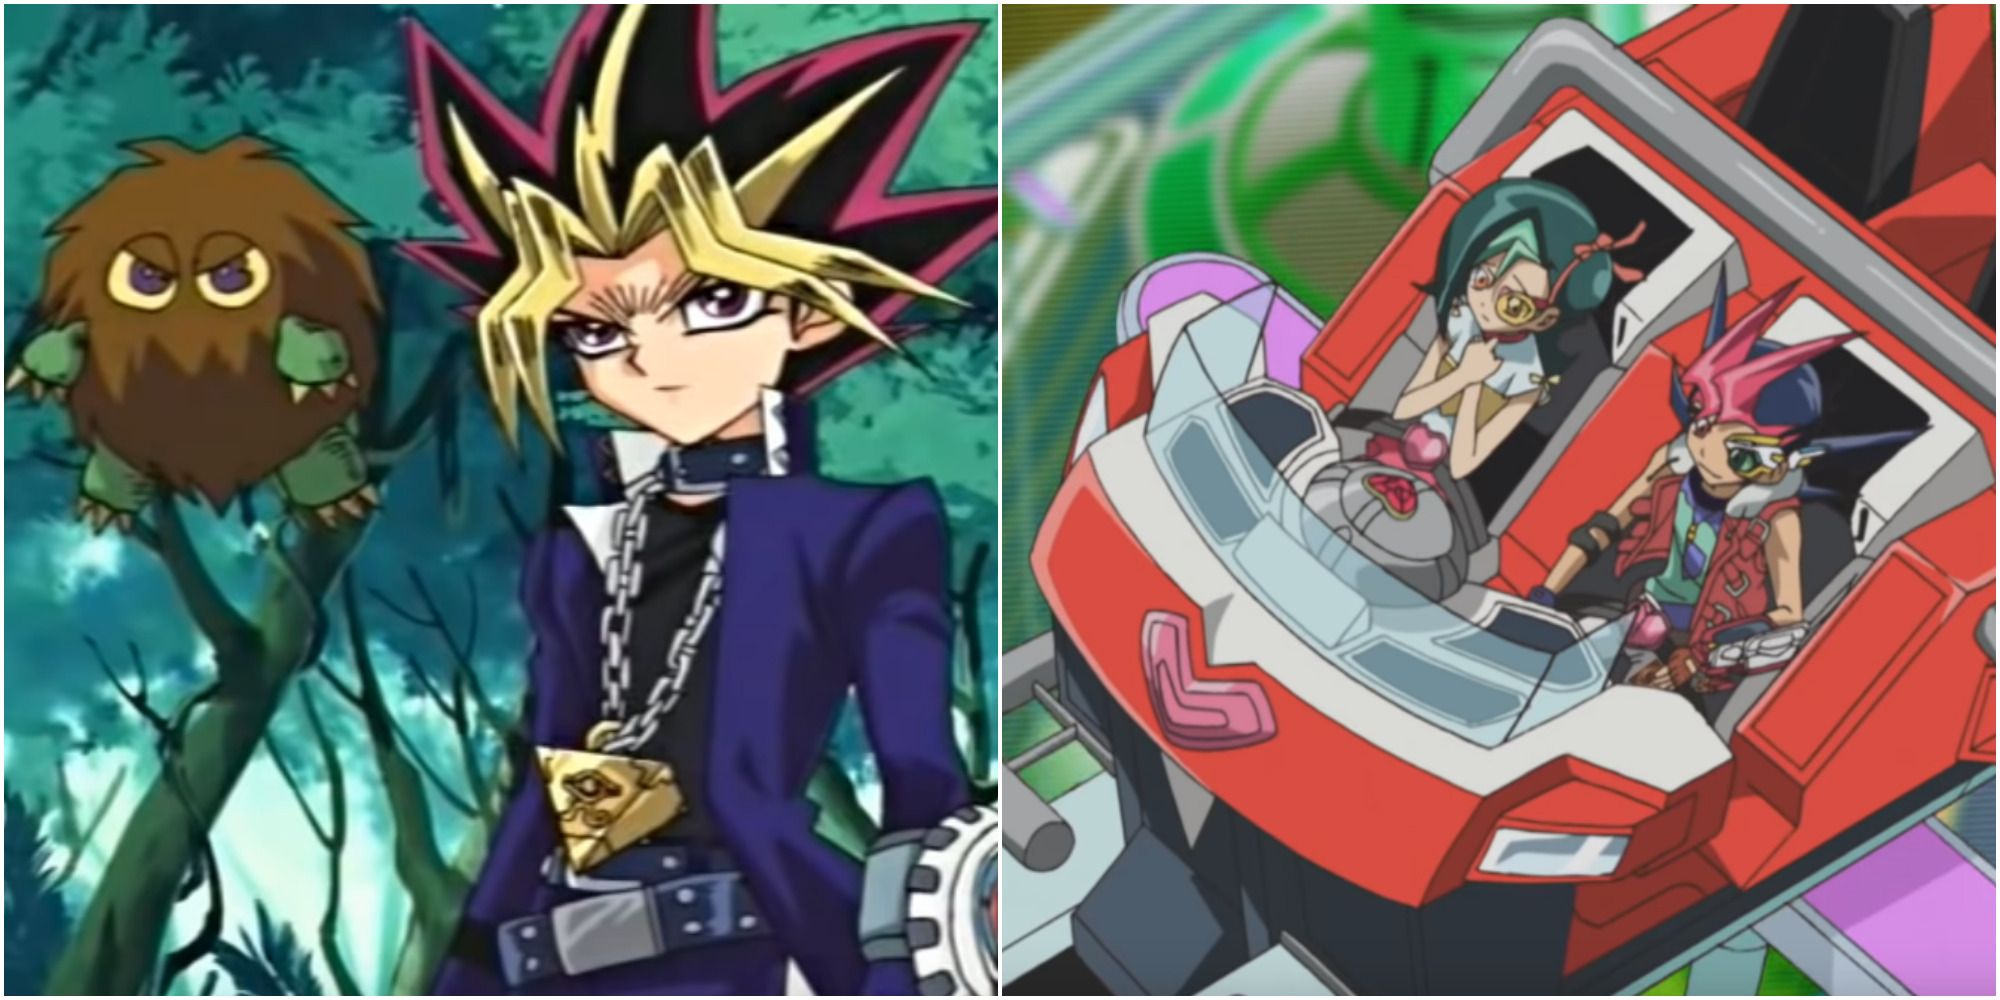 Mechanics From The Anime That We Never Used In Games Based On Yu-Gi-Oh!